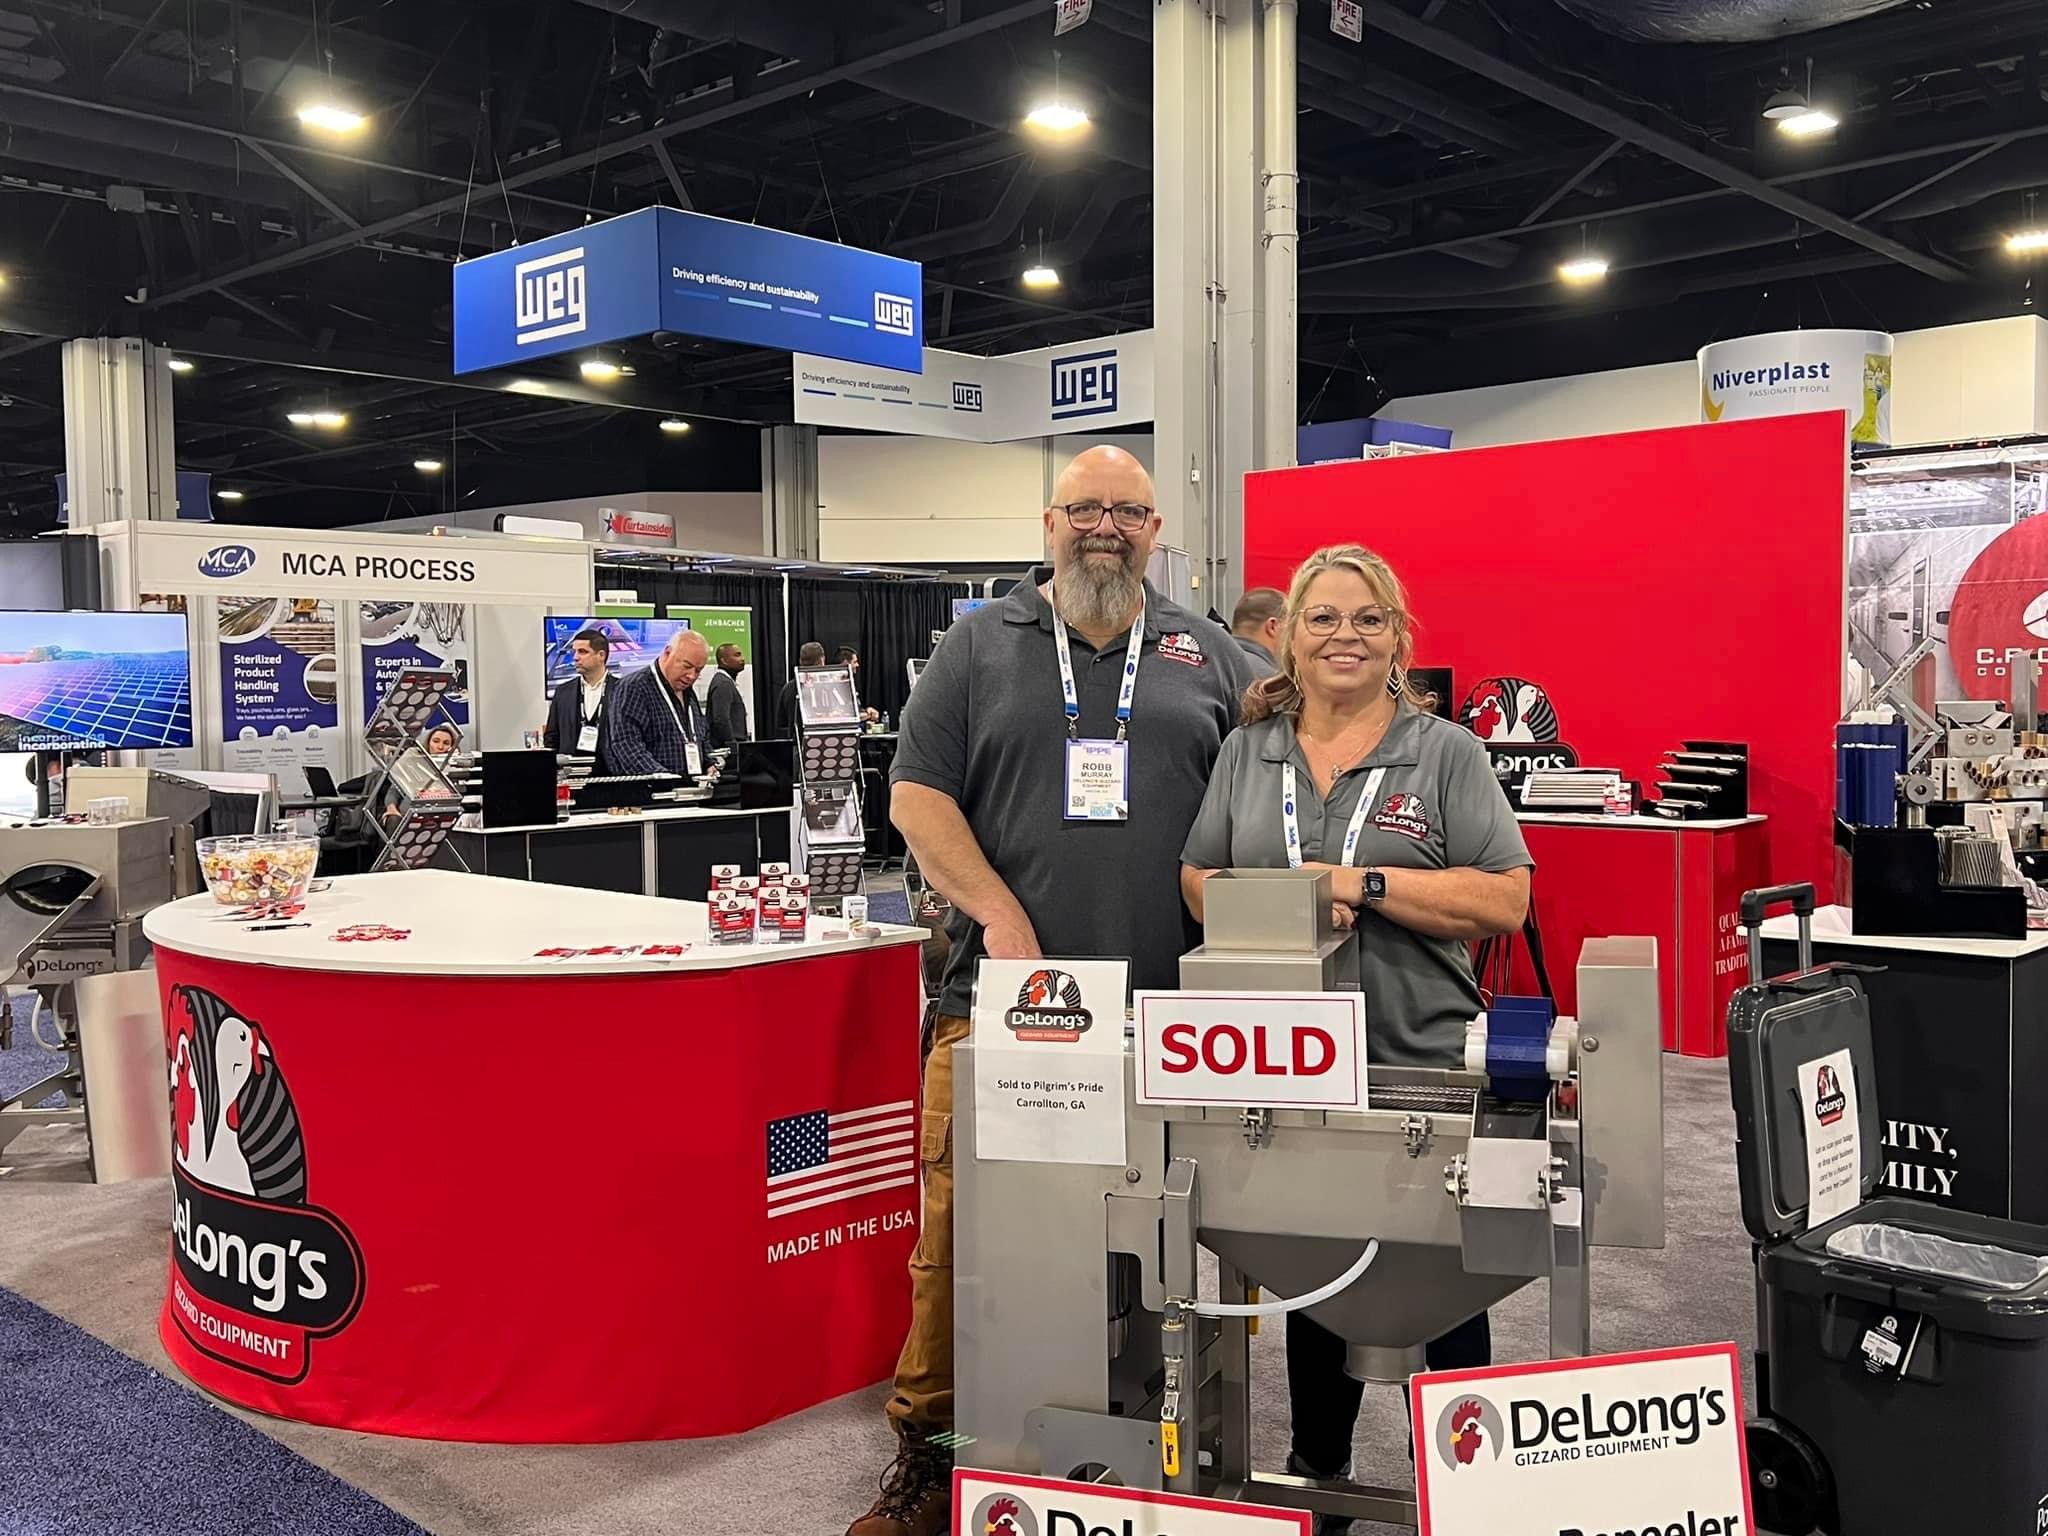 The DeLong's team at the IPPE event.